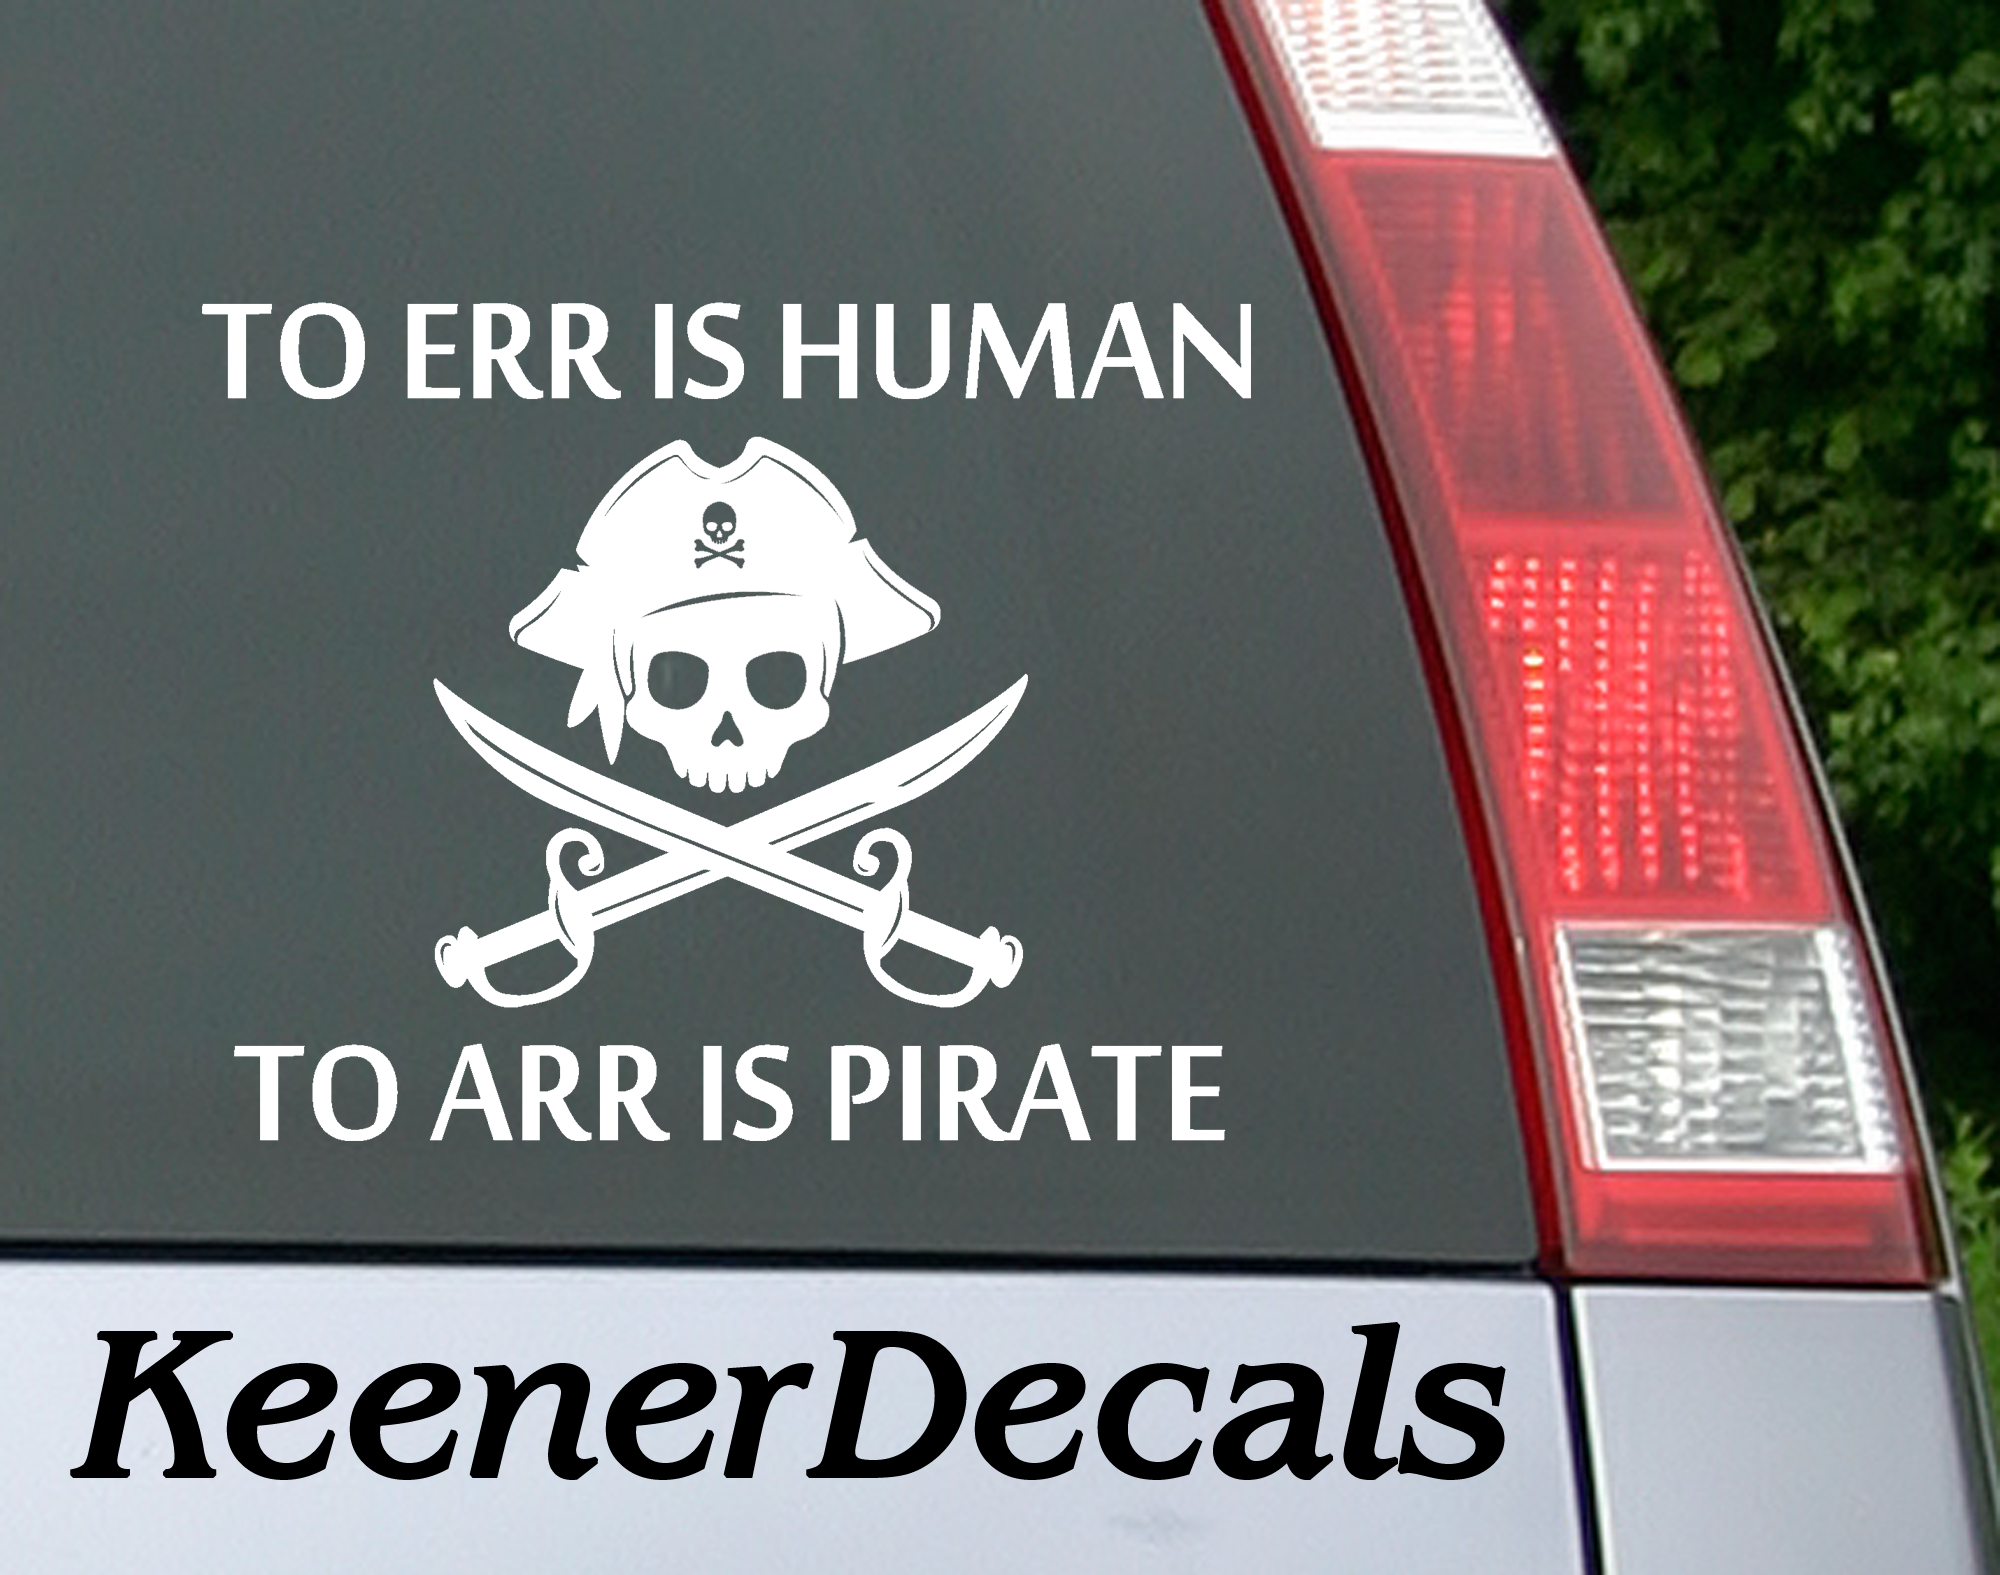 To ERR Is Human To ARR Is Pirate car decal is a humorous sticker for those who like pirates!  5"W x 4"H Car Decal, Car Sticker, Car Vinyl, Bumper Sticker, Vinyl Stickers, Vinyl Sticker.